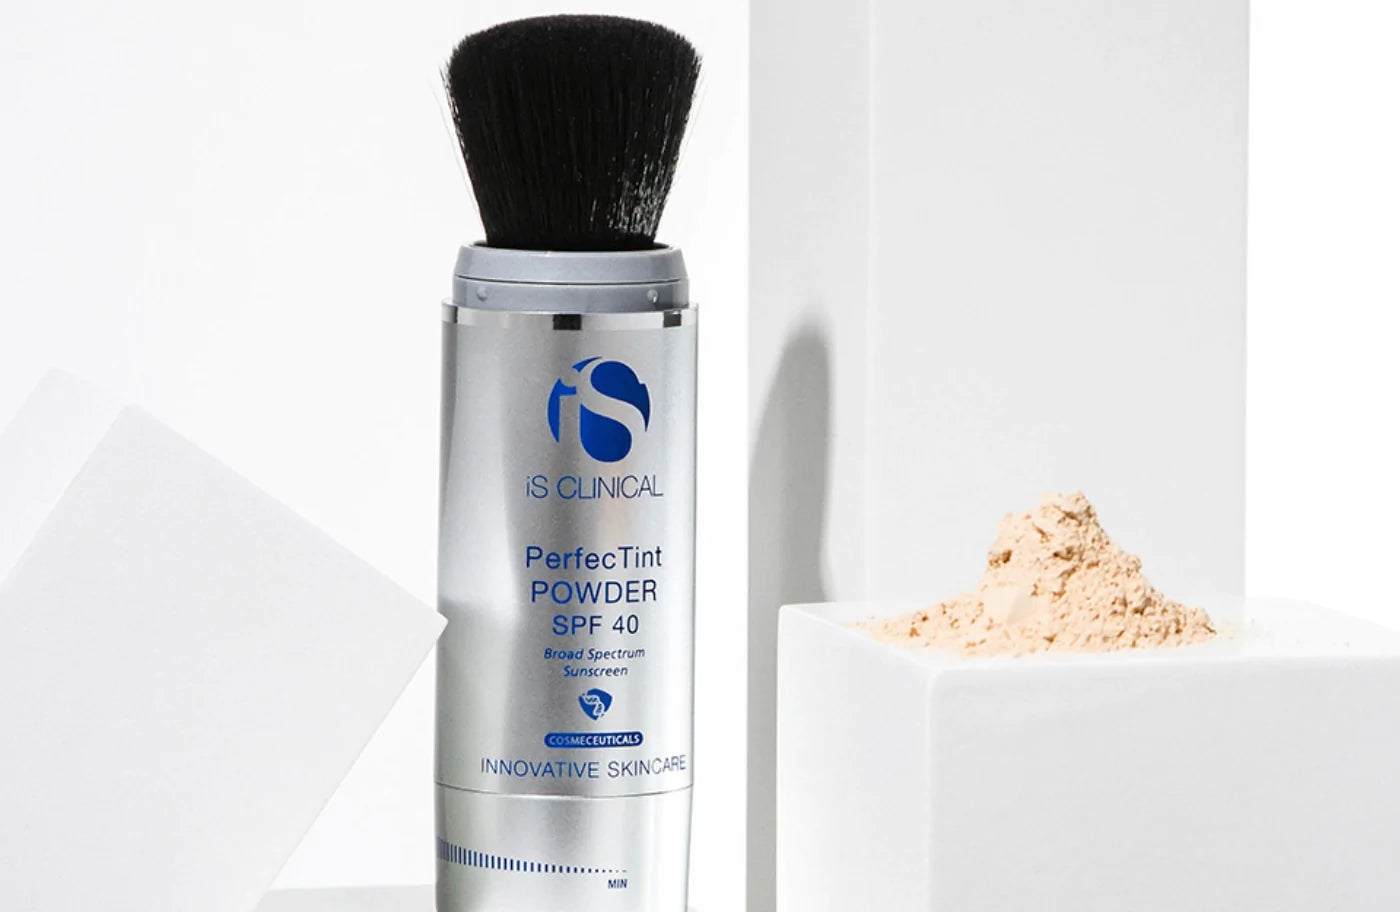 iS Clinical PerfecTint Powder SPF 40 - 3.5g (2 refills)